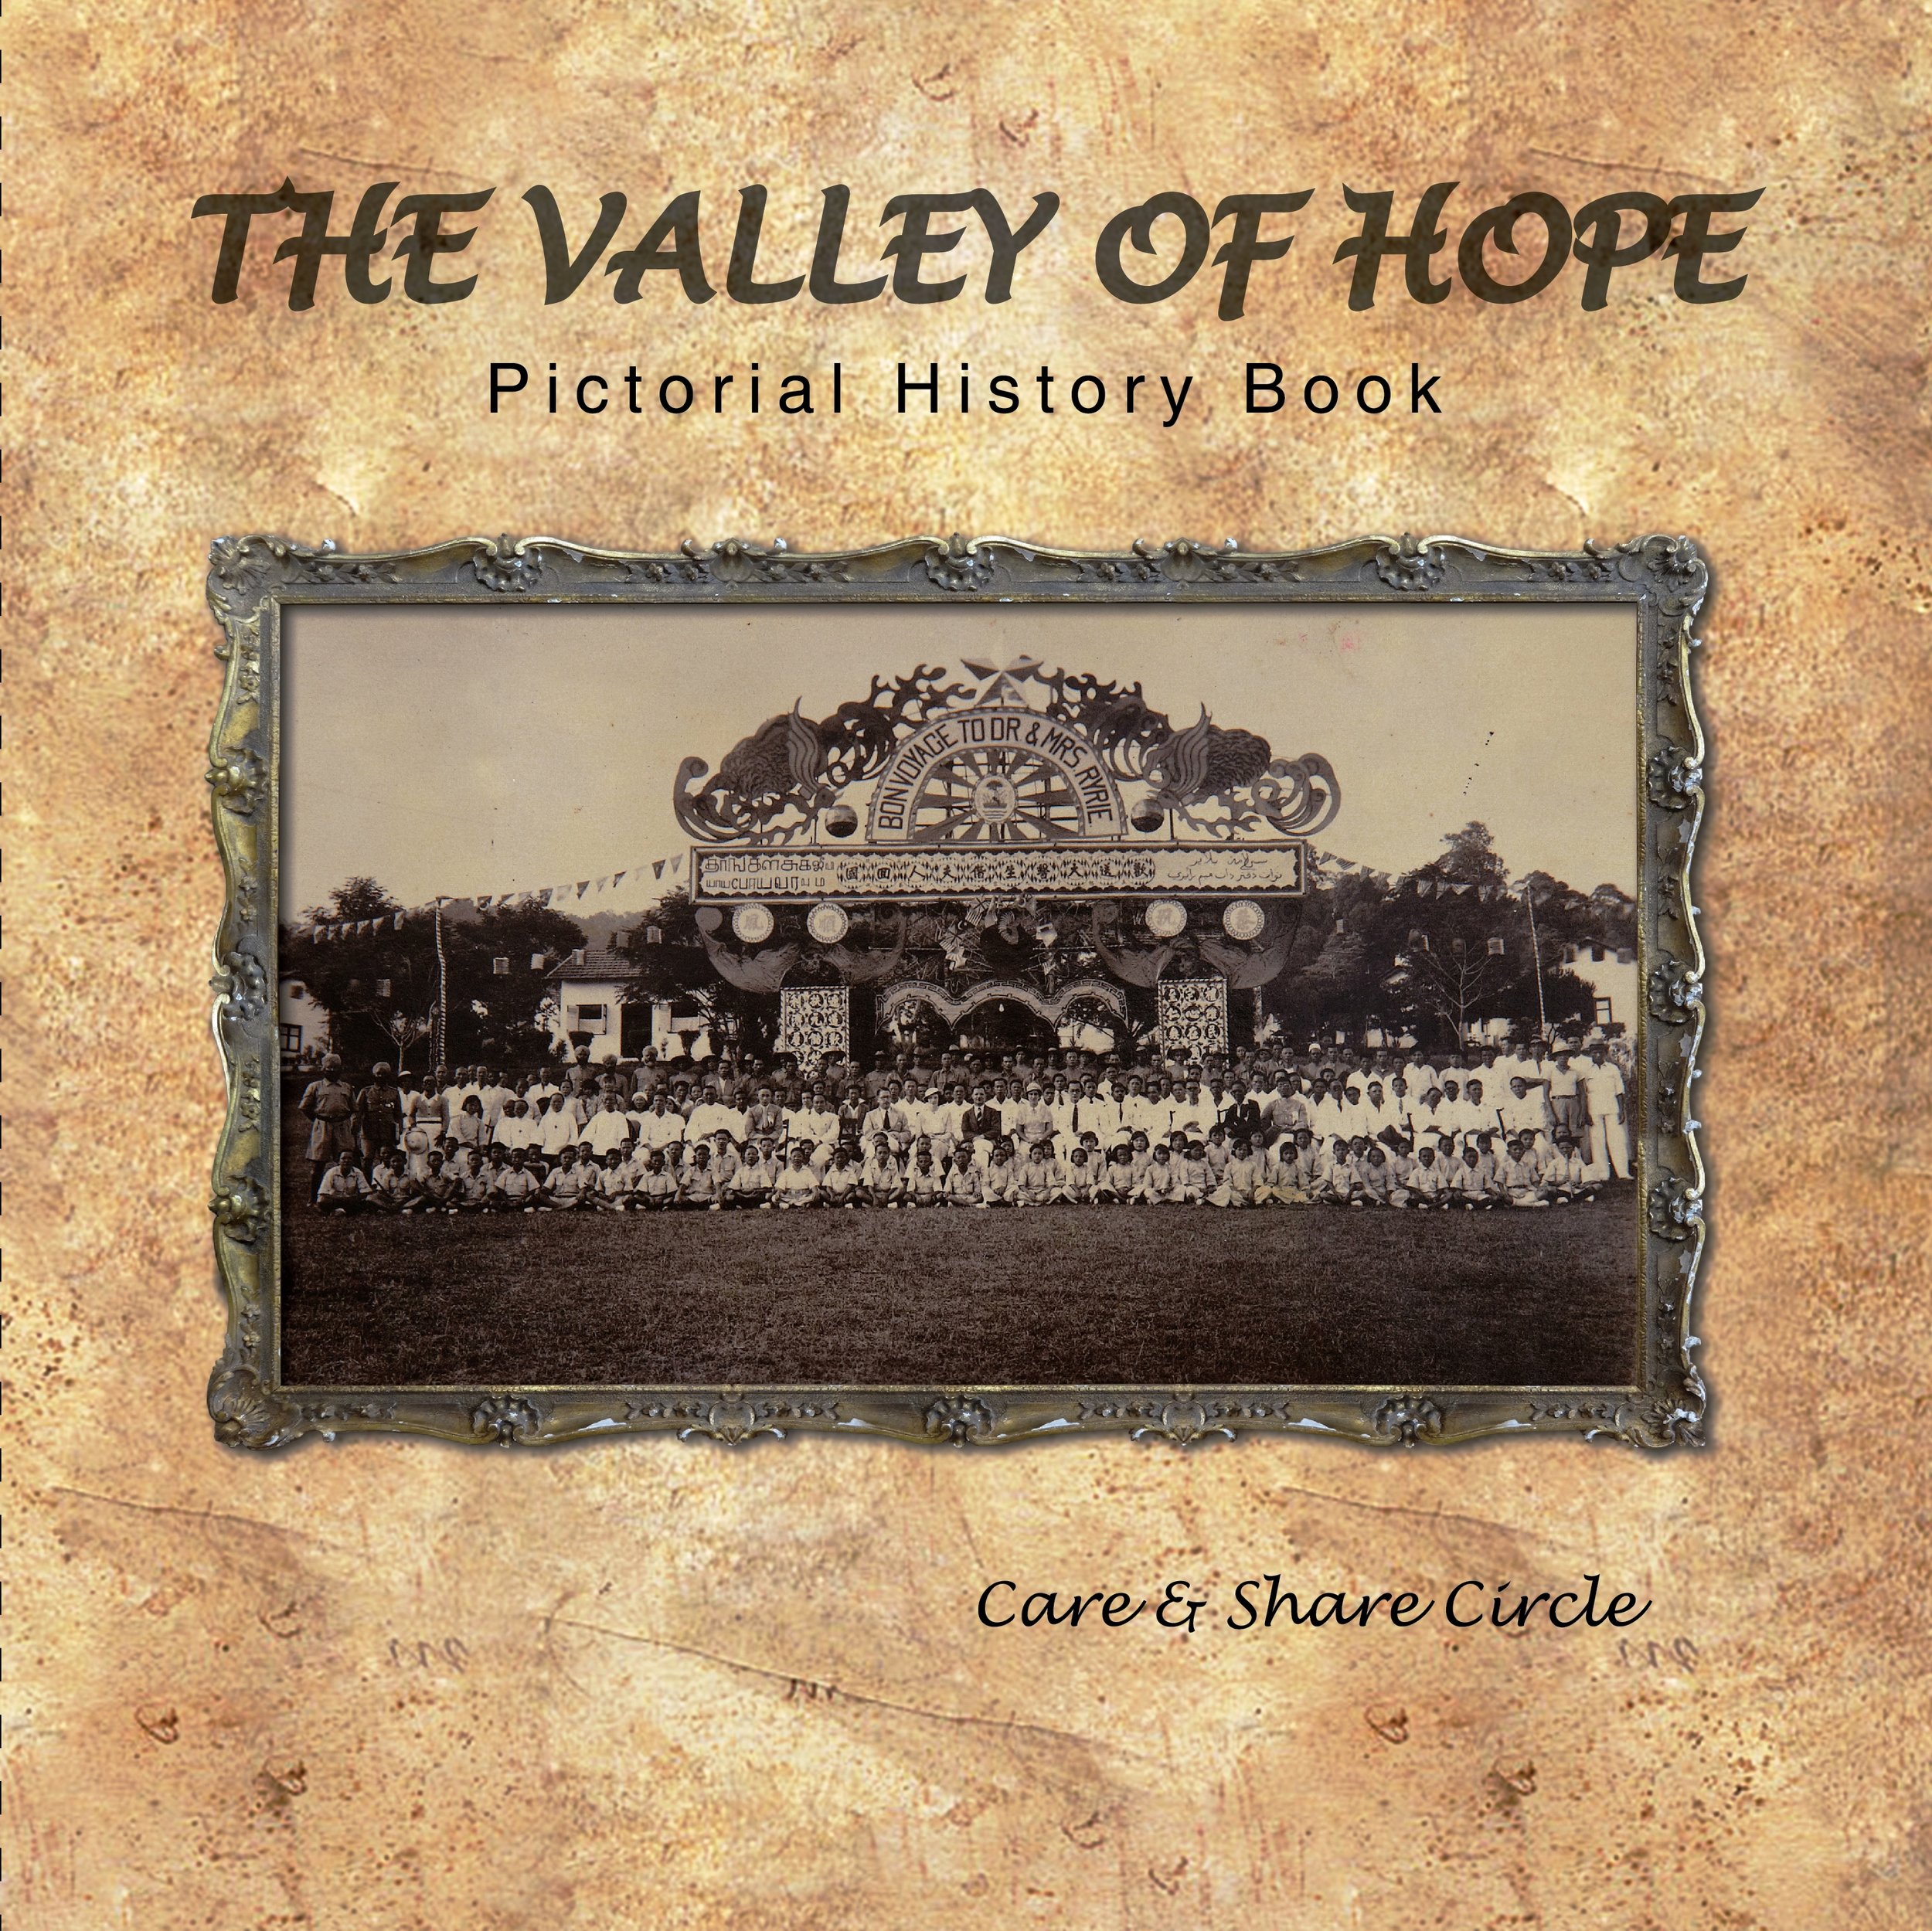  The Valley of Hope Pictorial History Book, English Edition, published by Care &amp; Share Circle, 2015. (photo by Tan Ean Nee) 